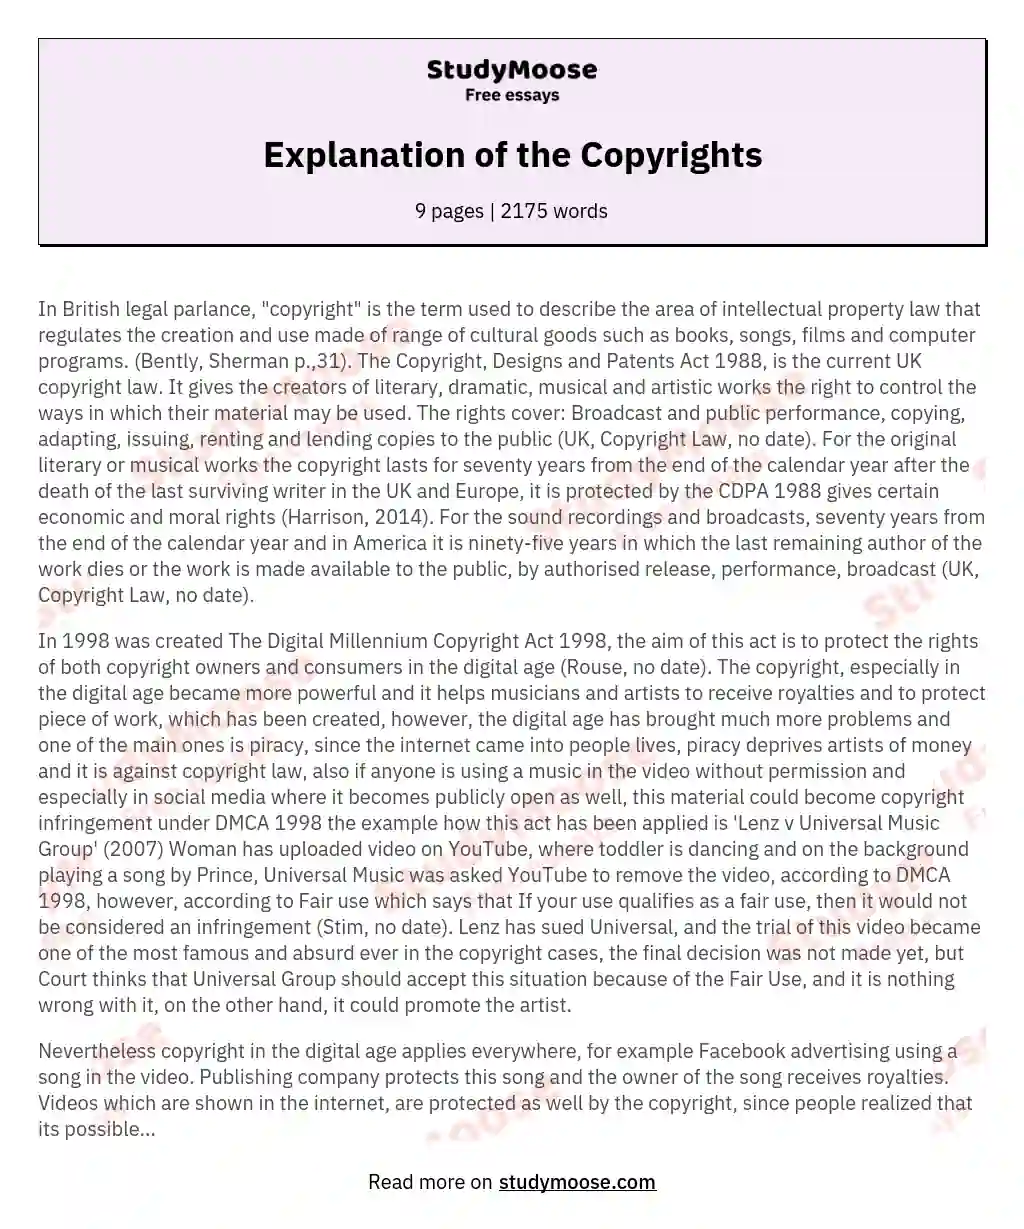 Explanation of the Copyrights essay